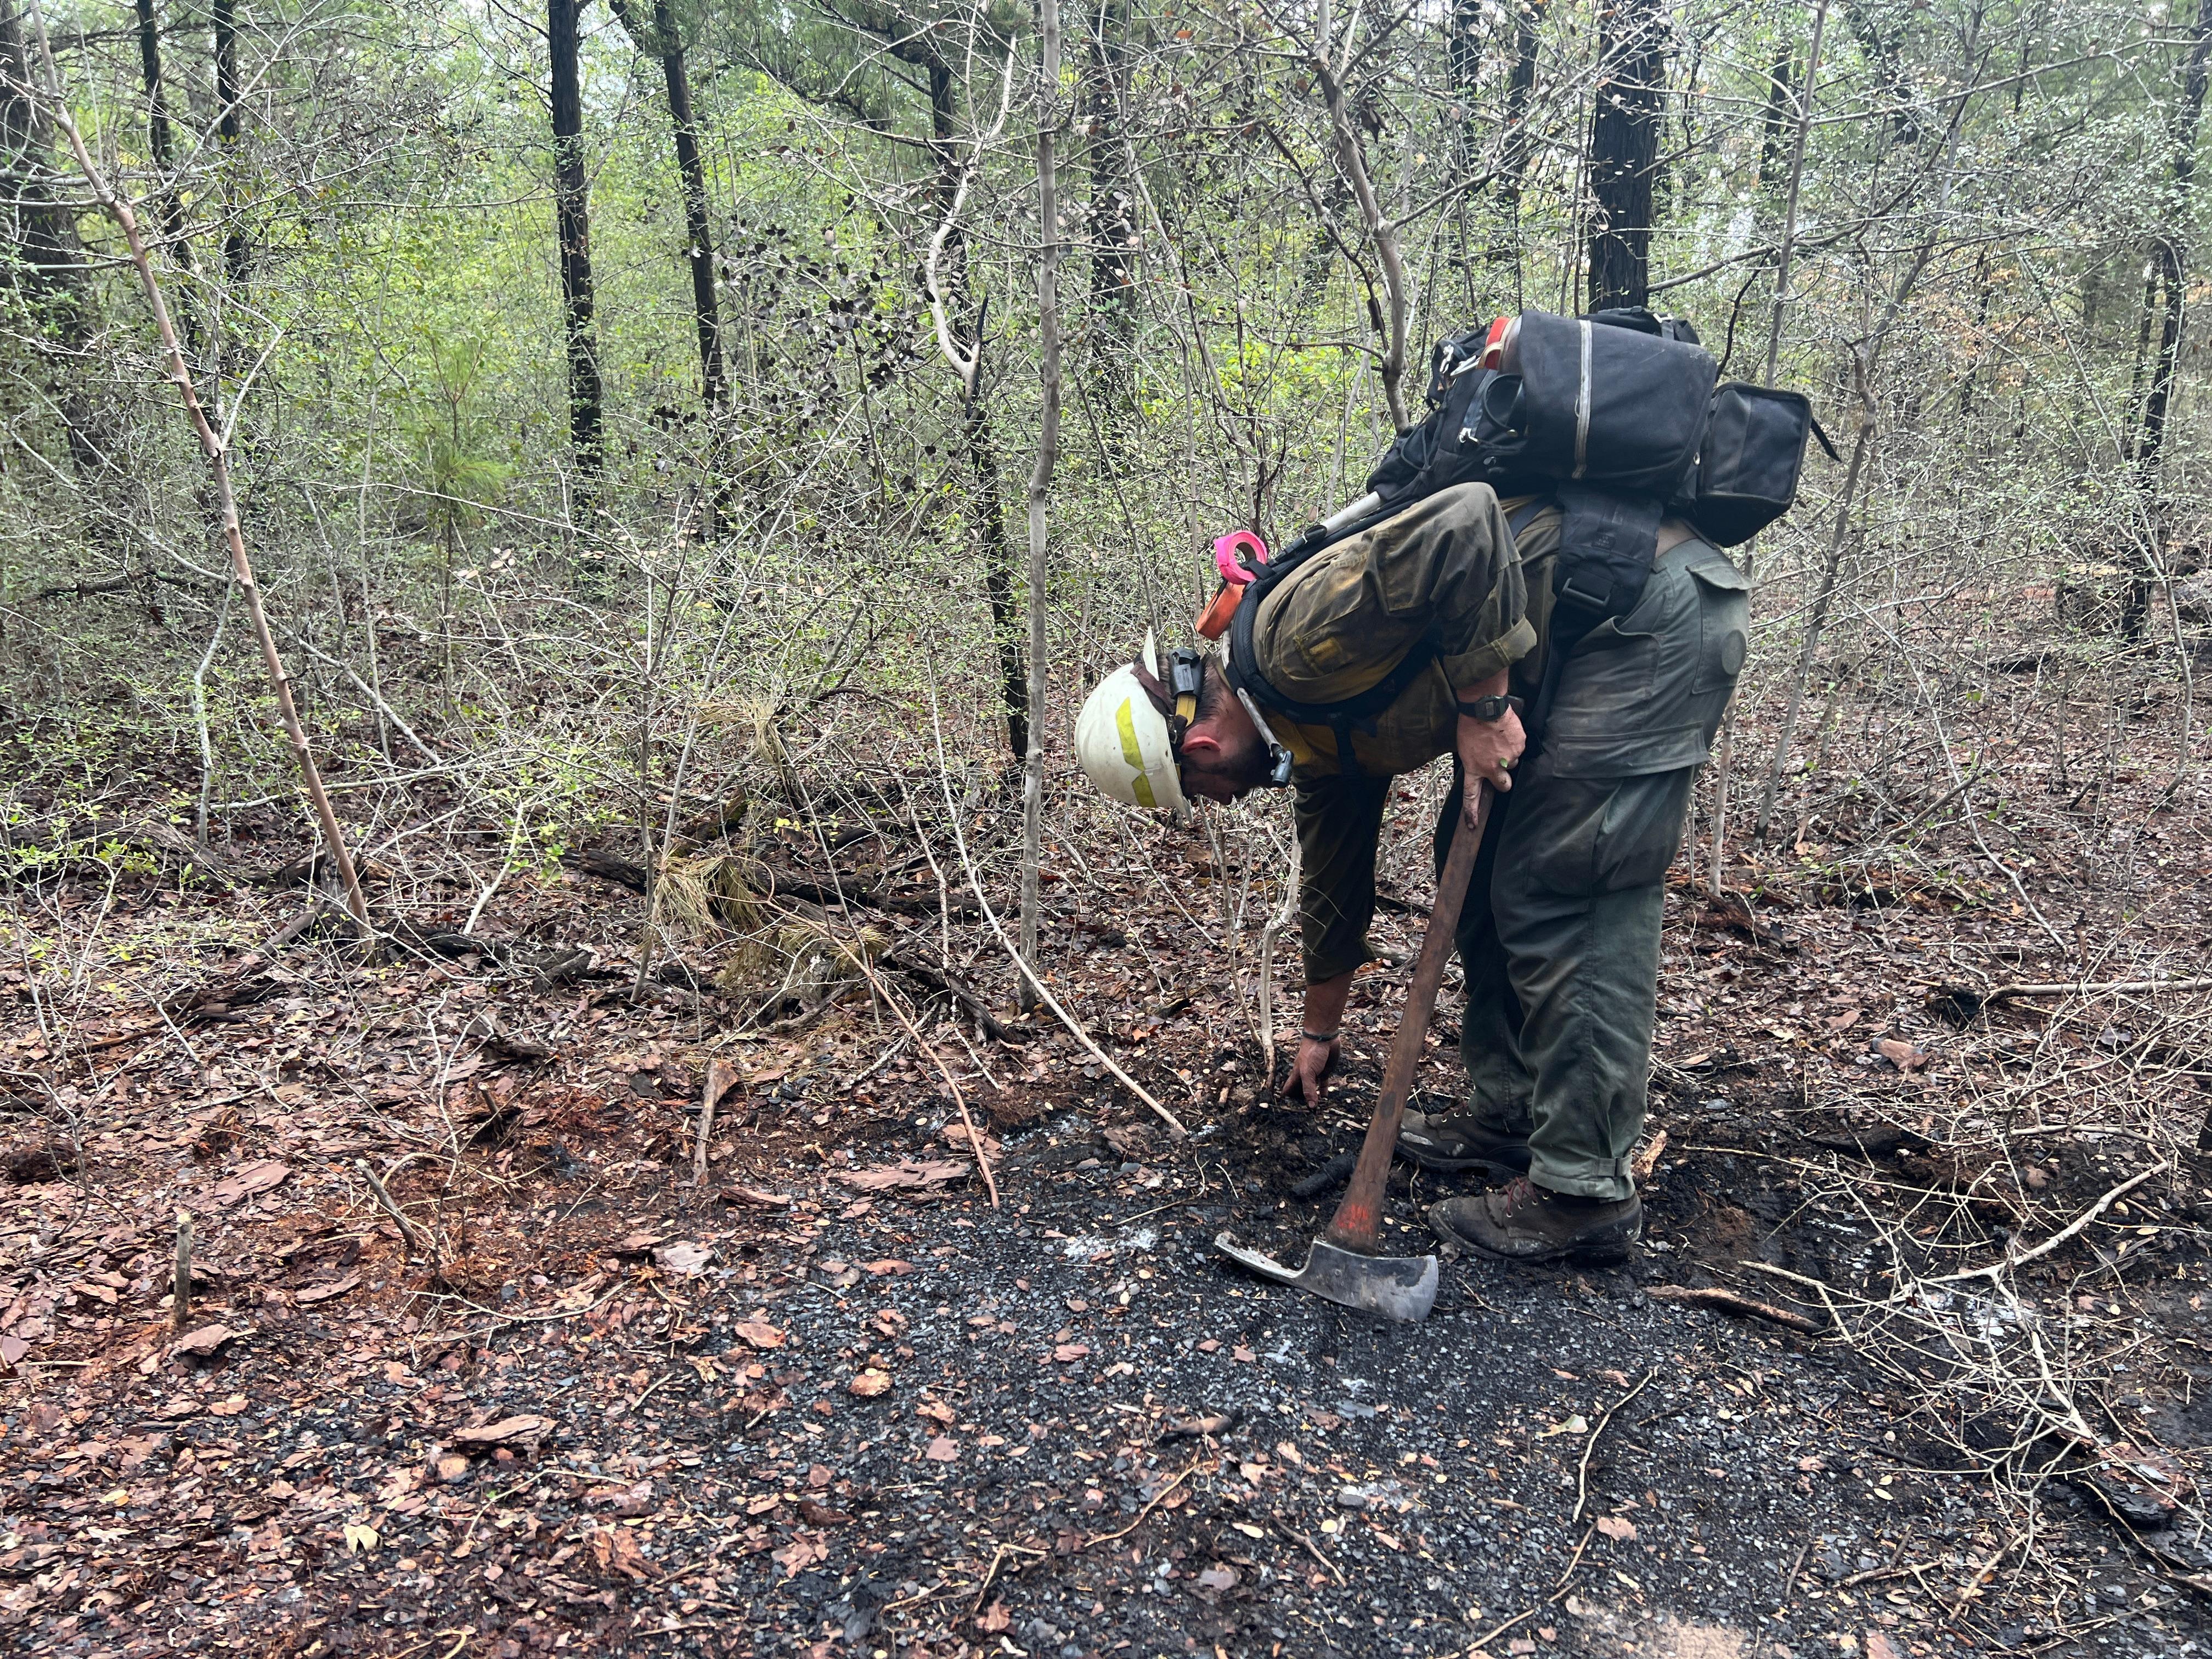 A single firefighter bends over to touch the black, burned ground to check for heat with a bare hand.